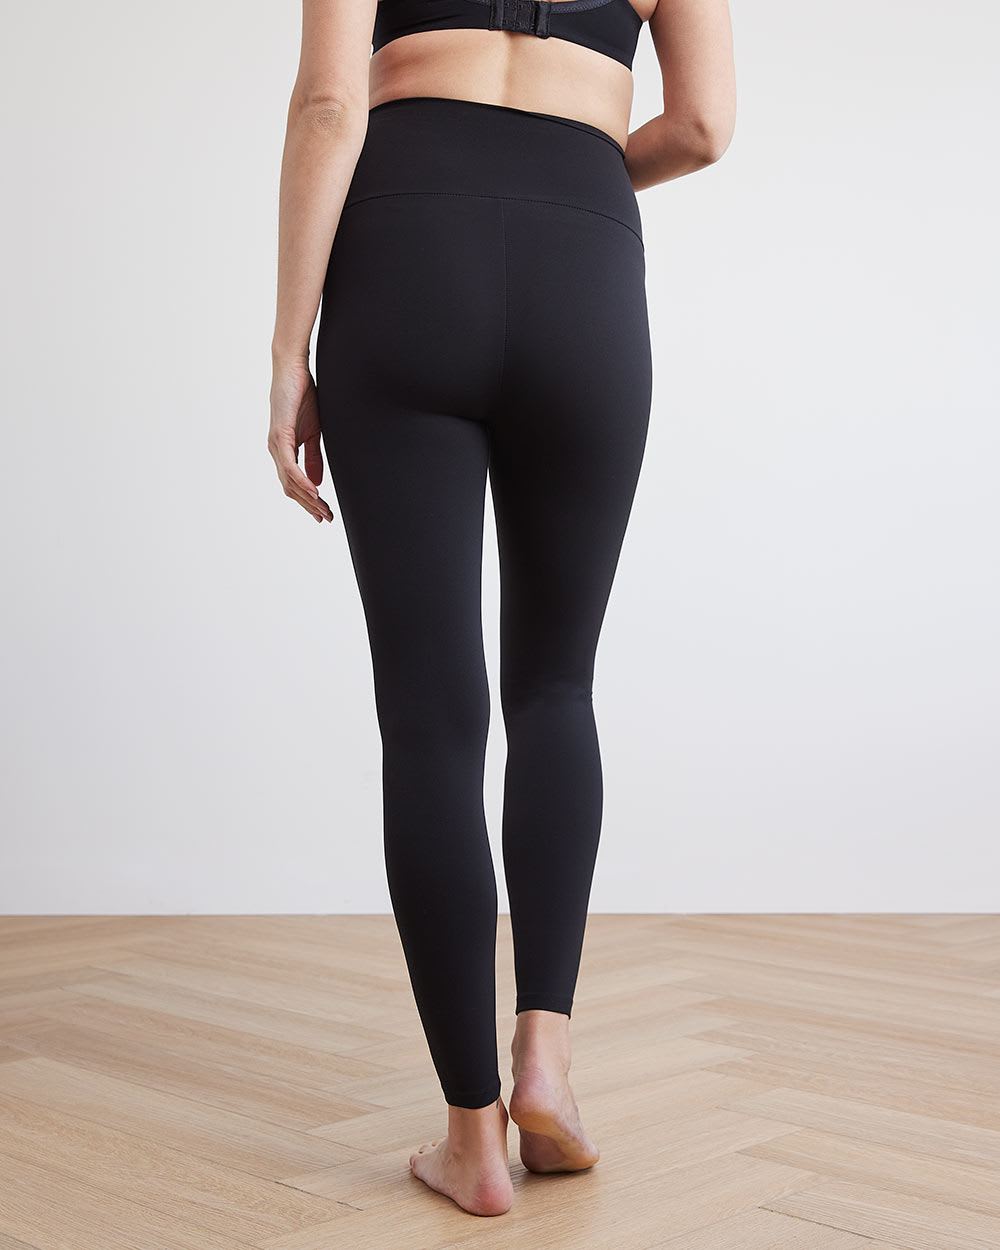 MATERNITY TIGHTS ANTHRACITE GREY ACTIV’SOFT anthracite